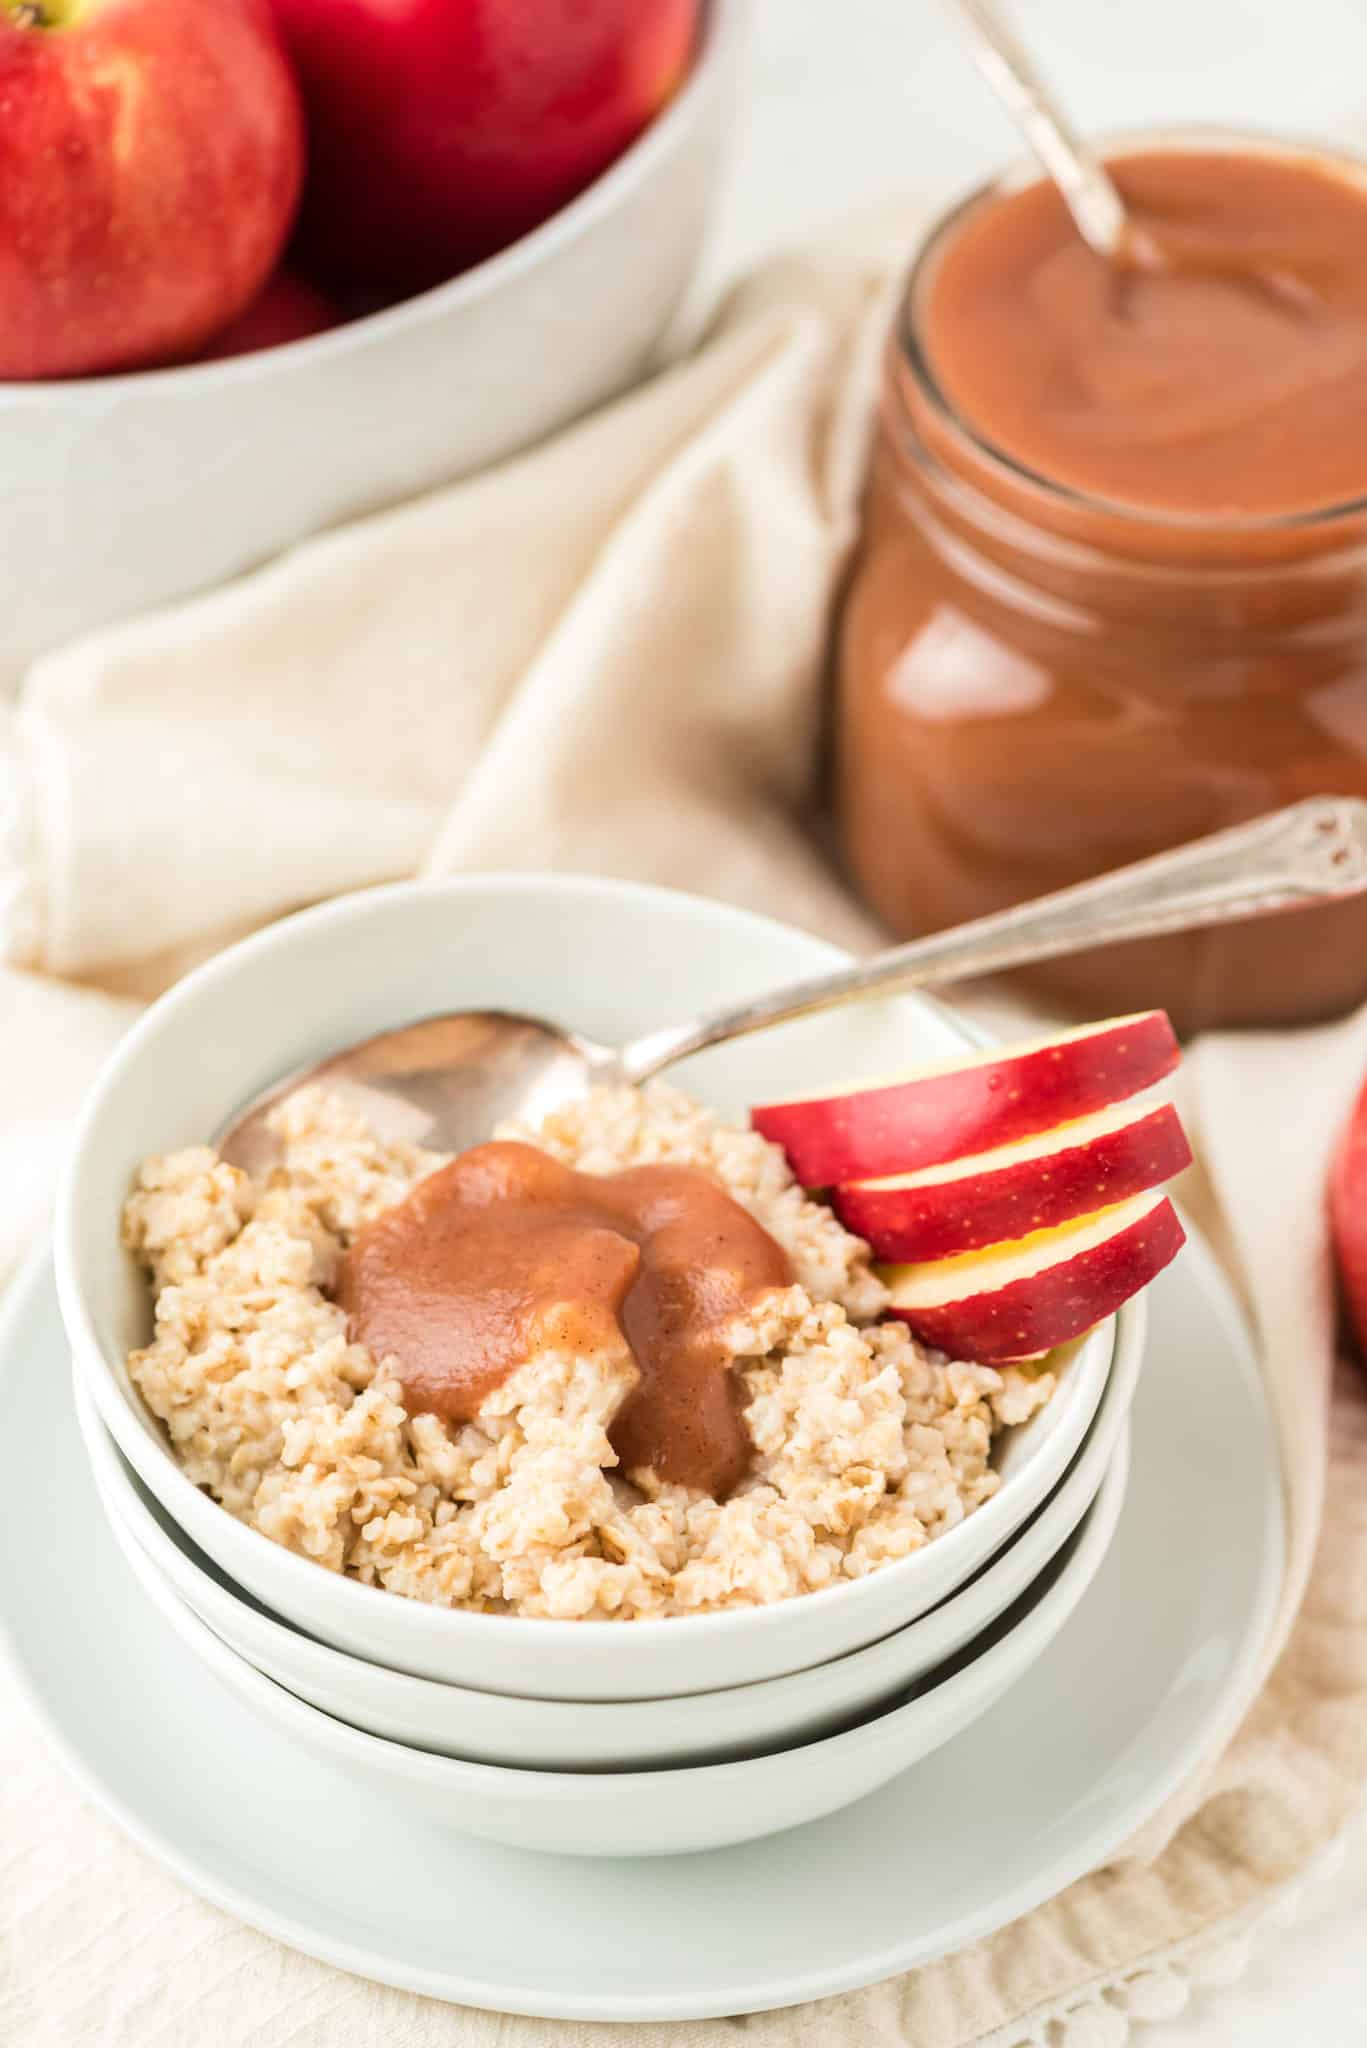 apple butter served on oatmeal.